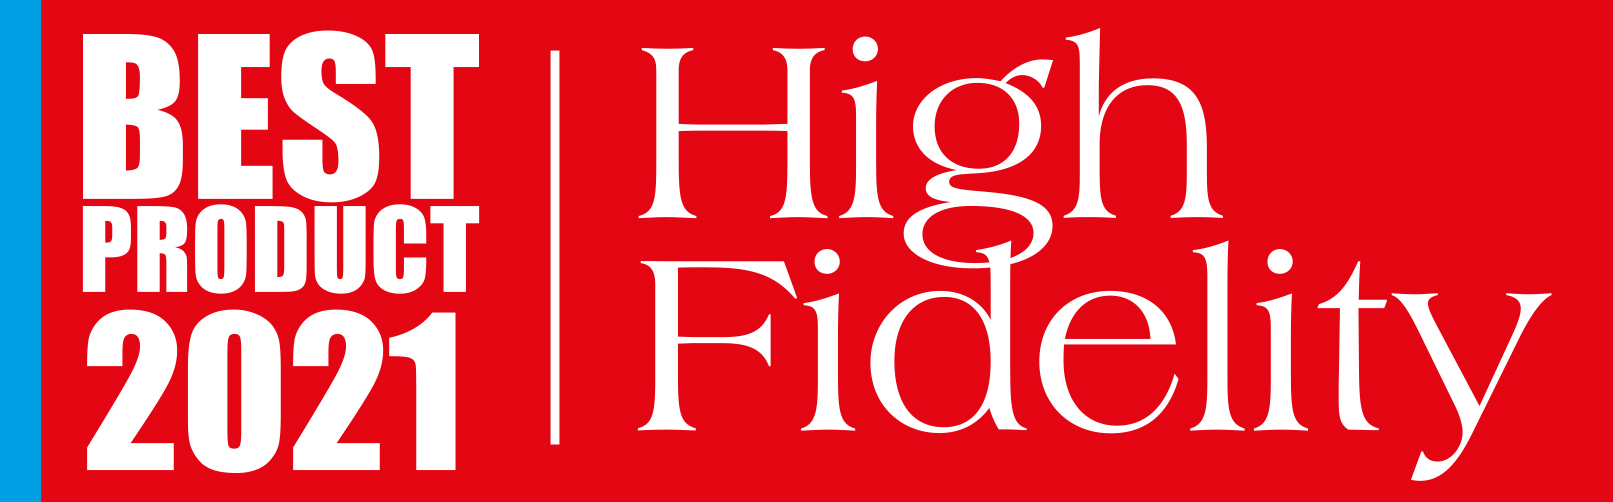 High Fidelity Best Product2021